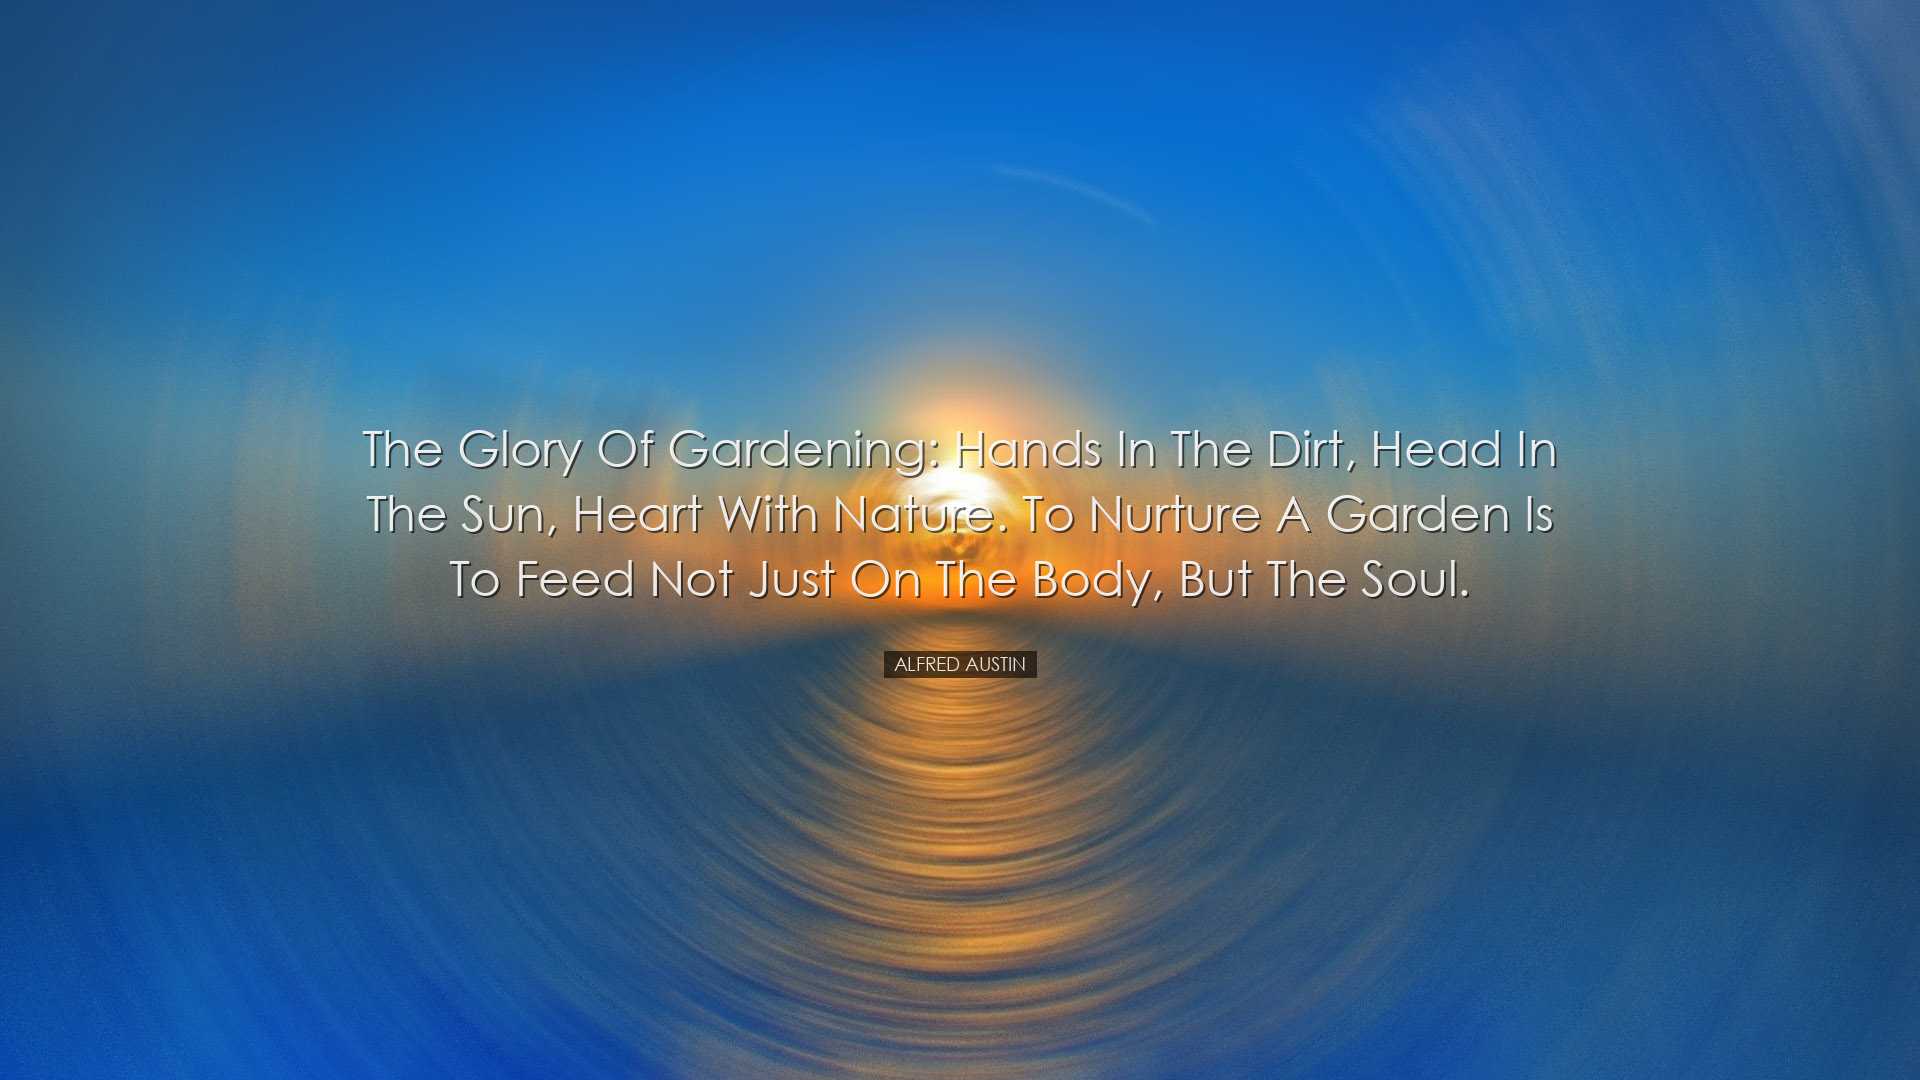 The glory of gardening: hands in the dirt, head in the sun, heart